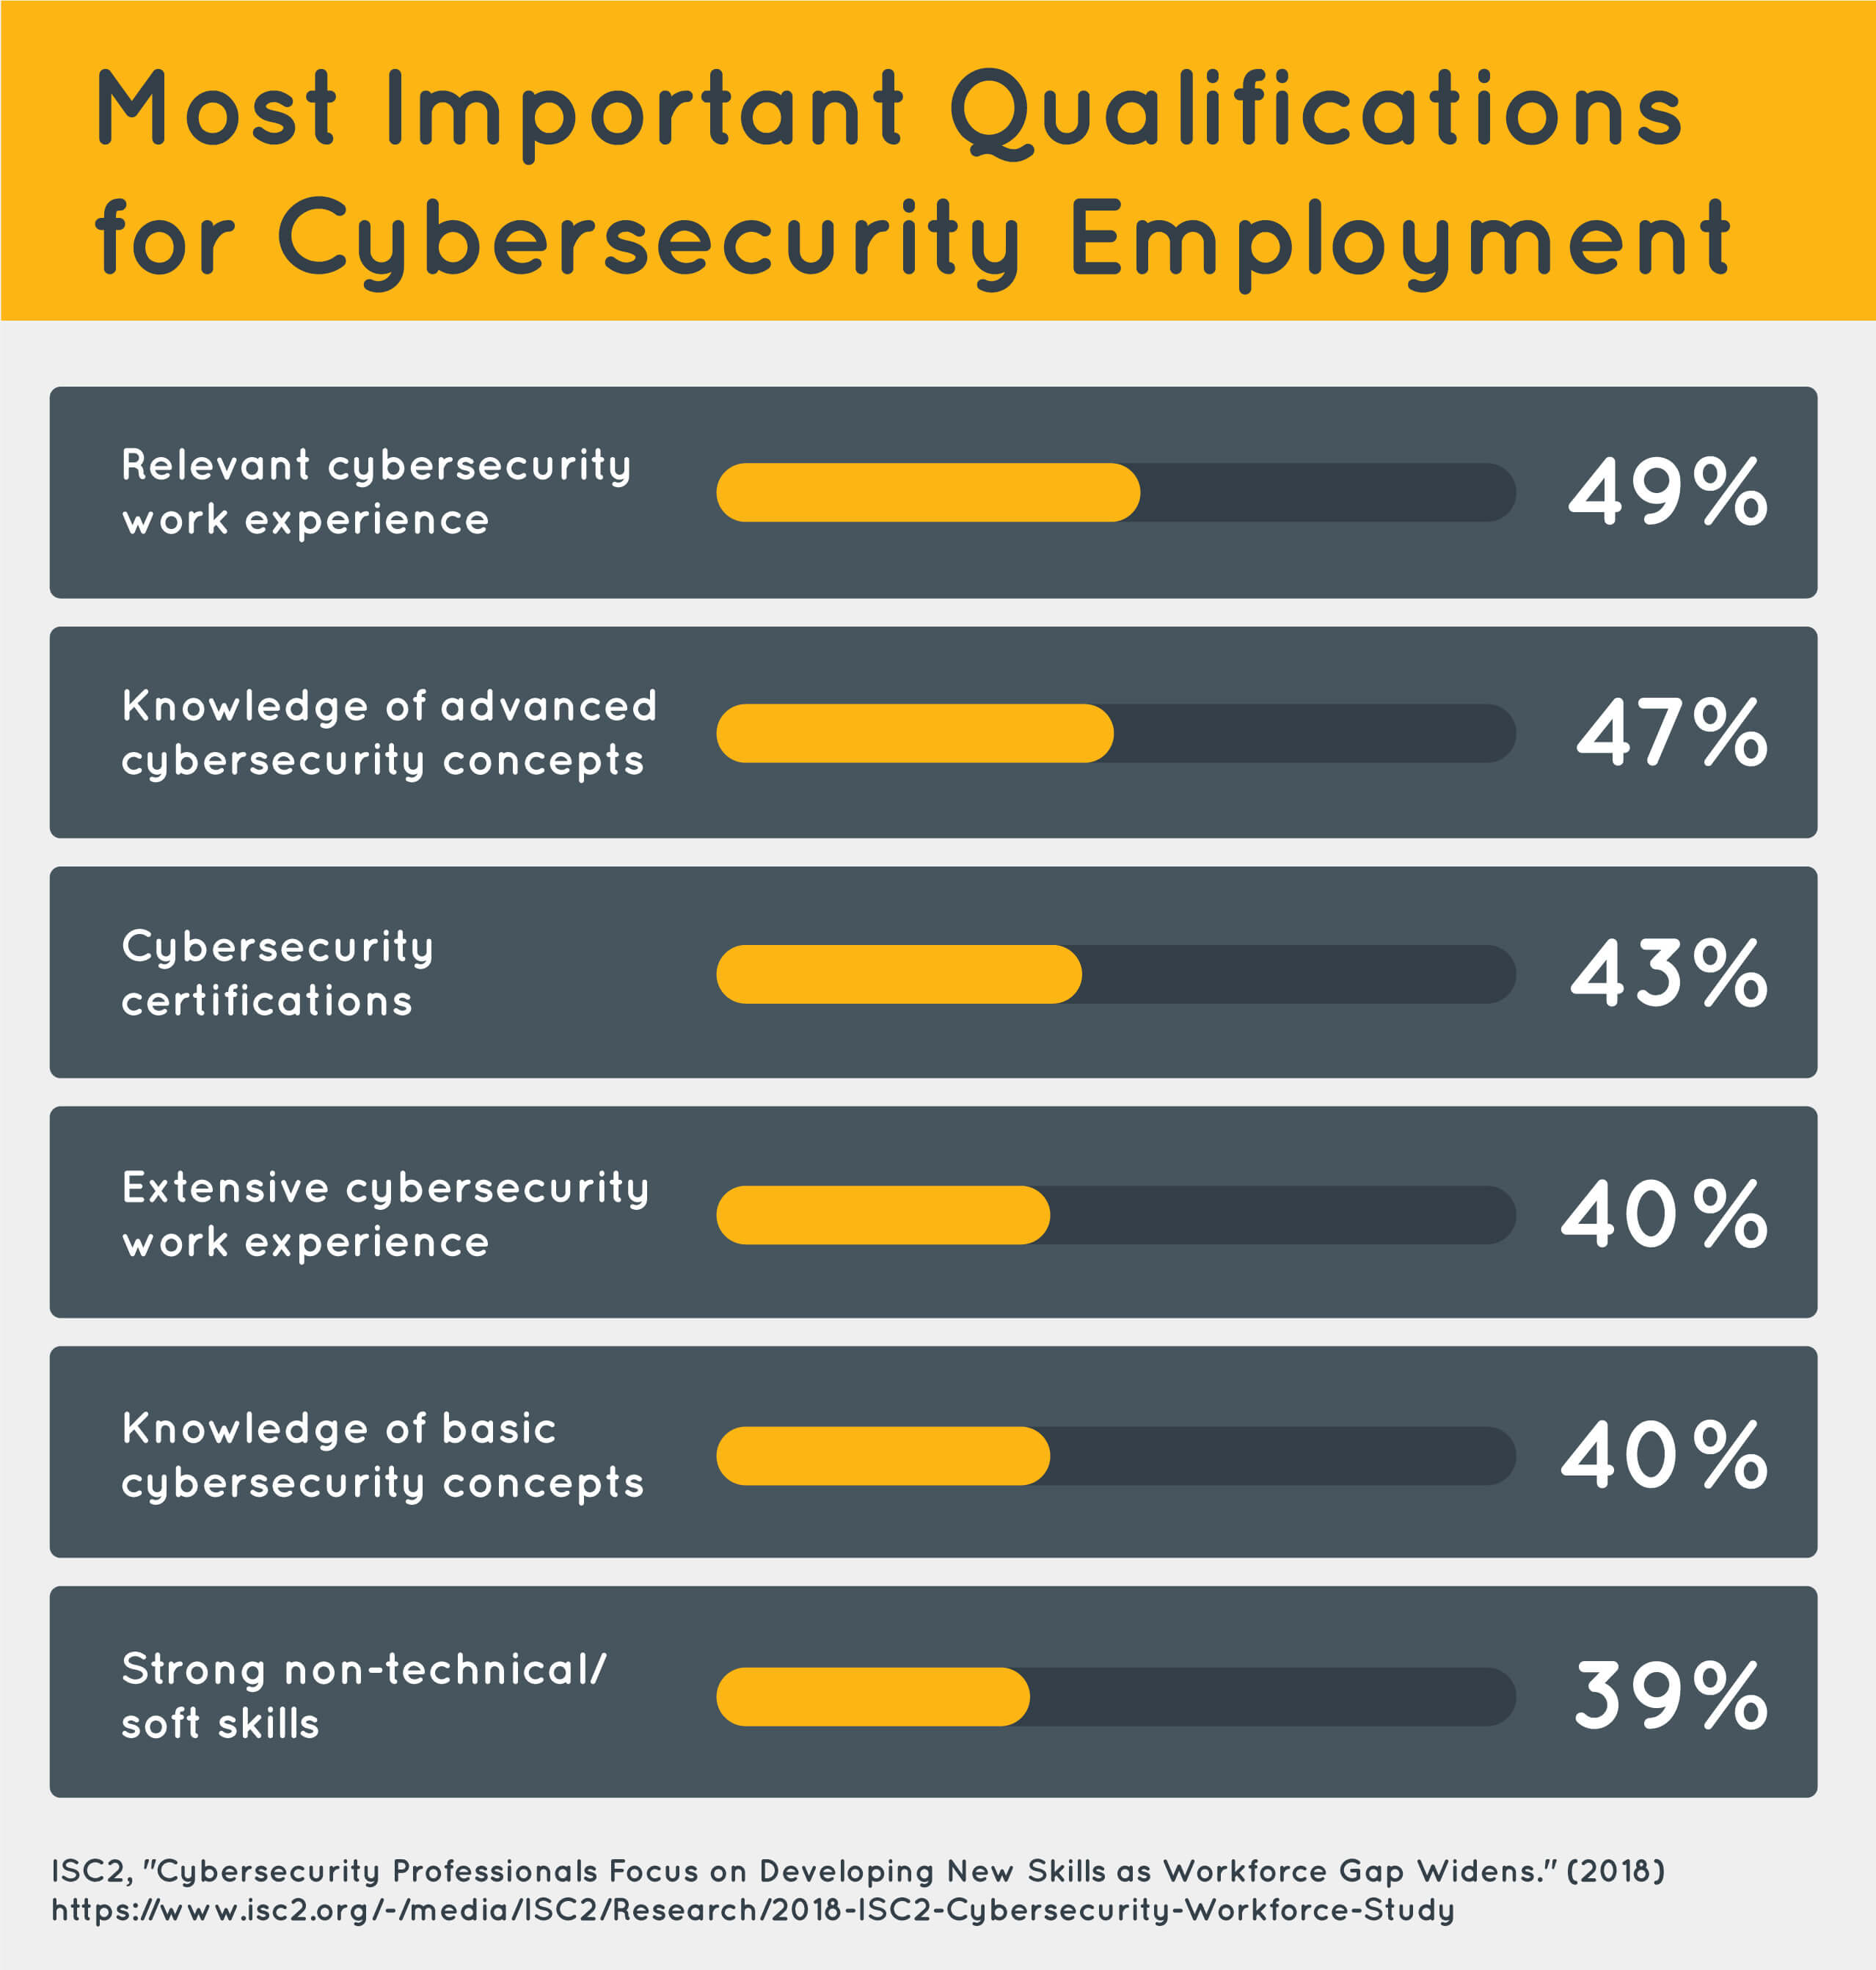 A breakdown of the most important qualifications for cybersecurity employment